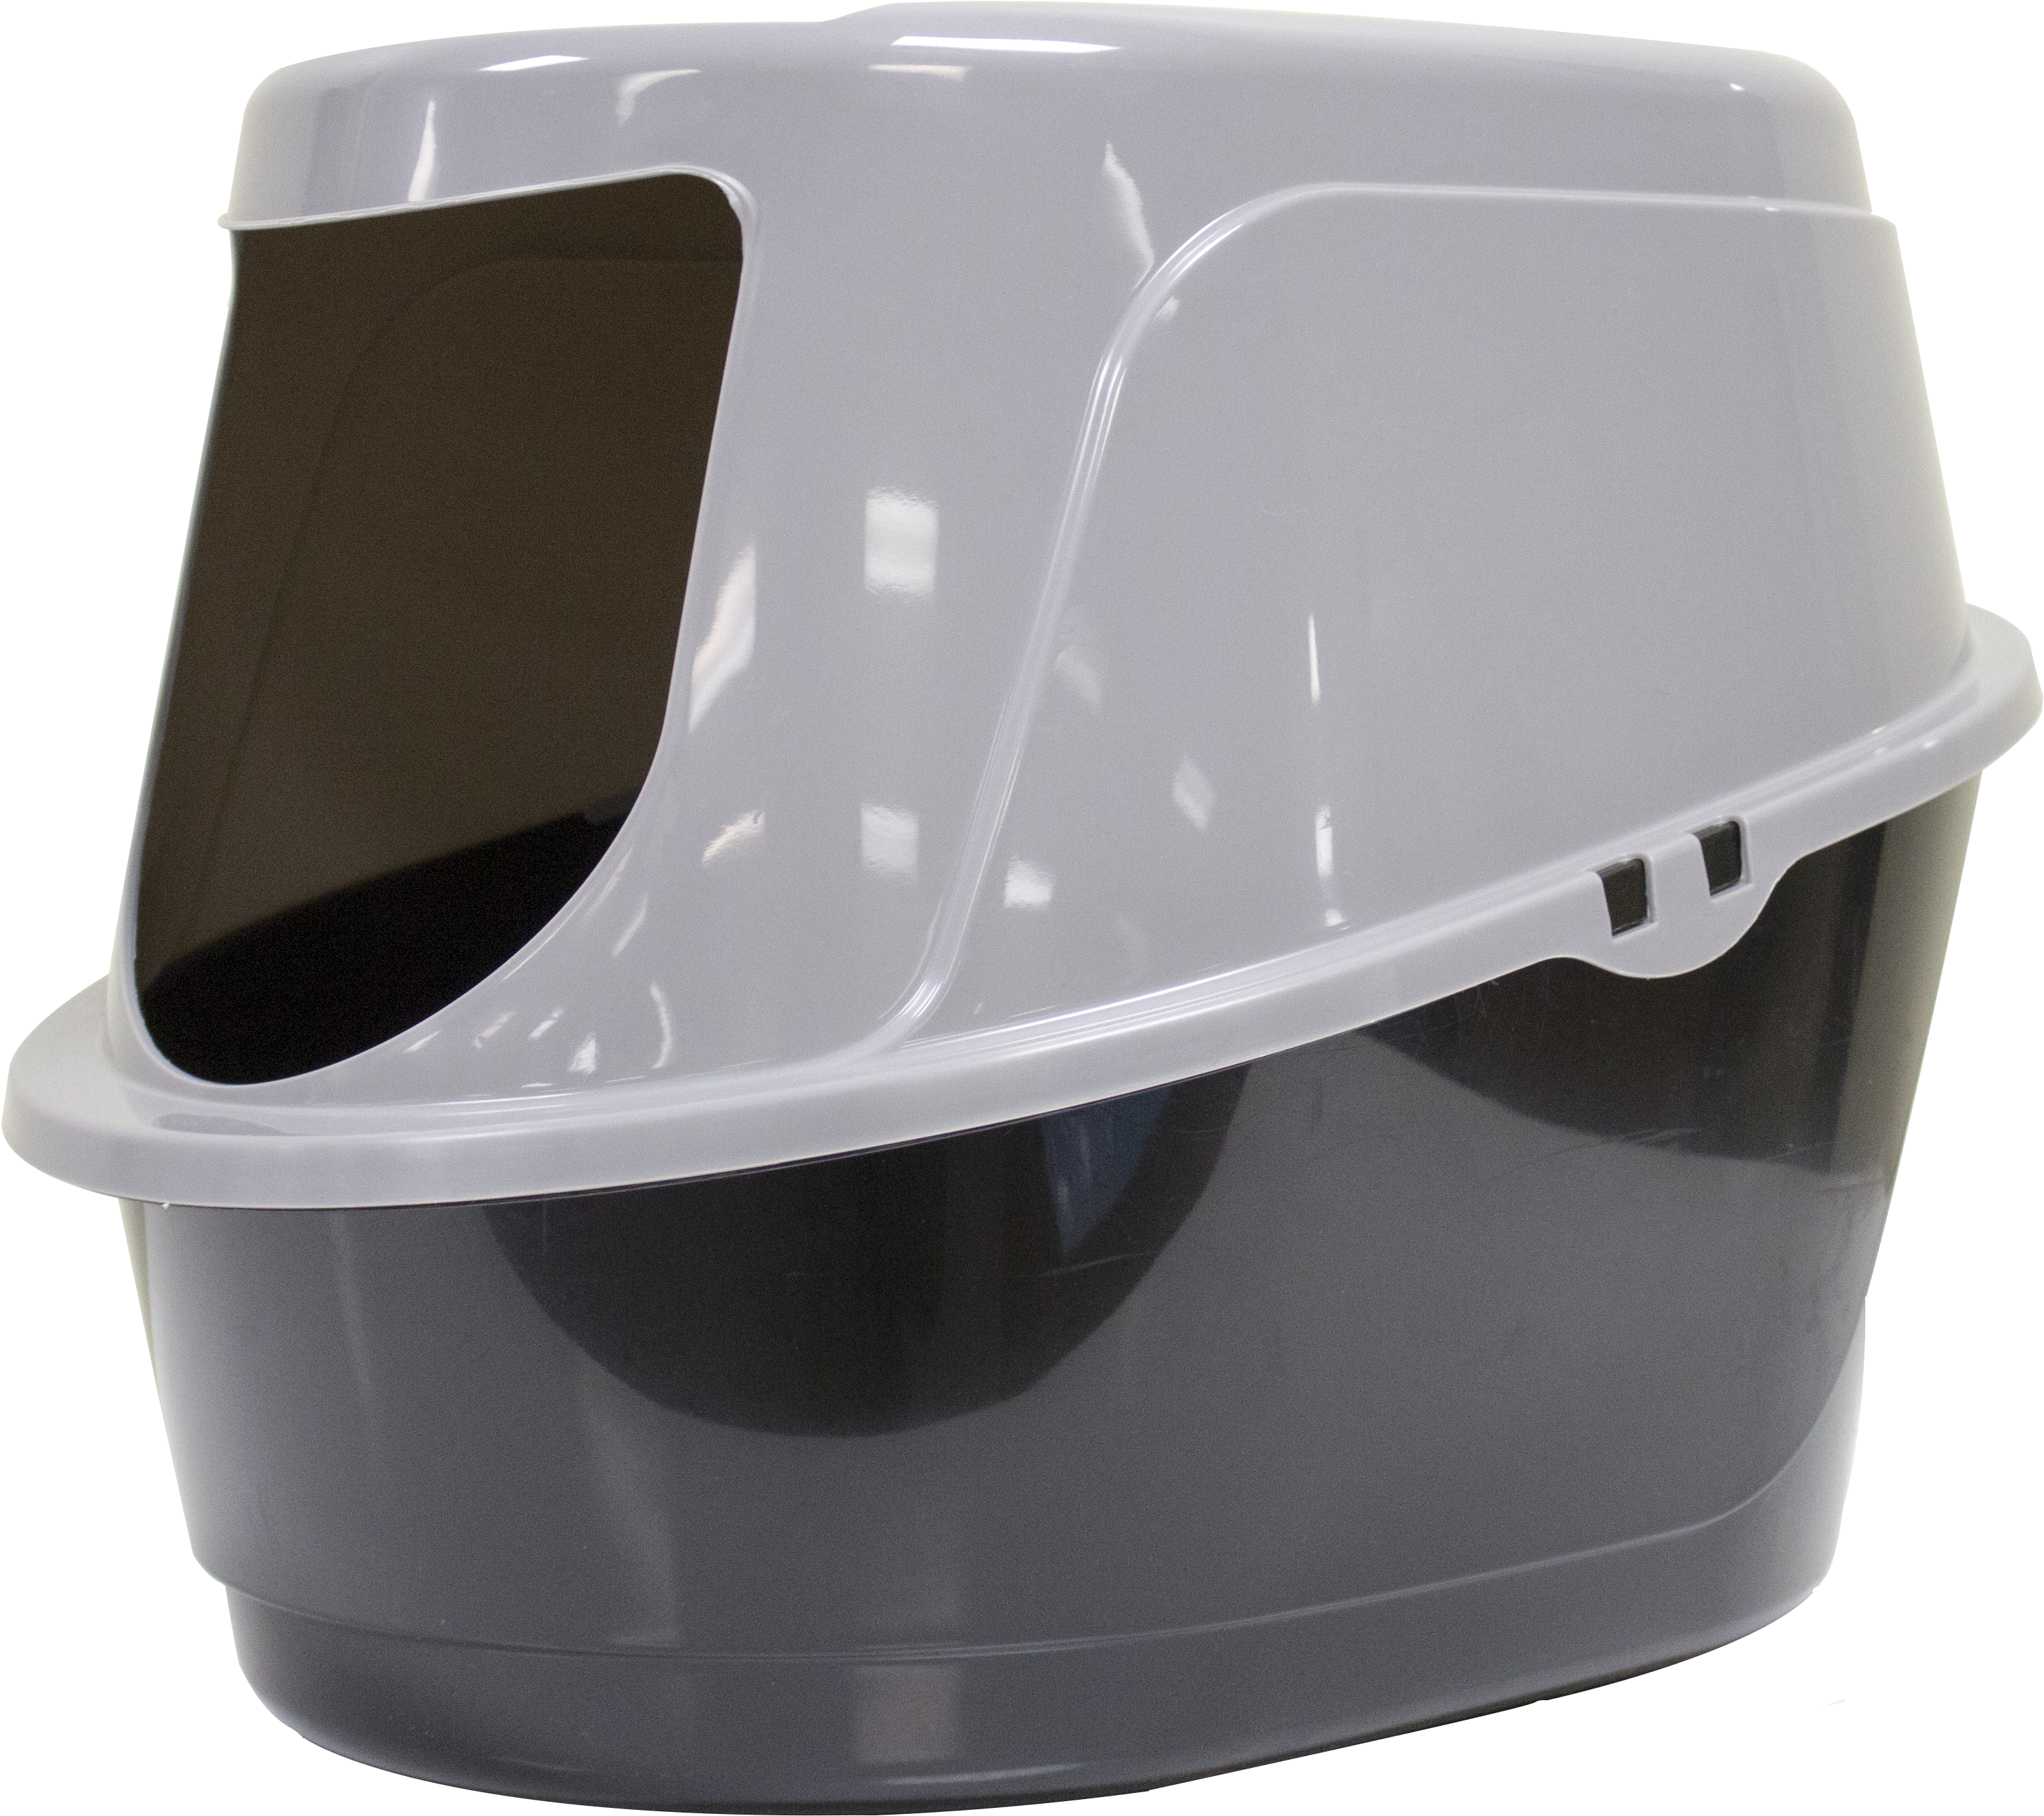 Large Hooded Litter Box - Motorcycle Helmet (5184x3456), Png Download